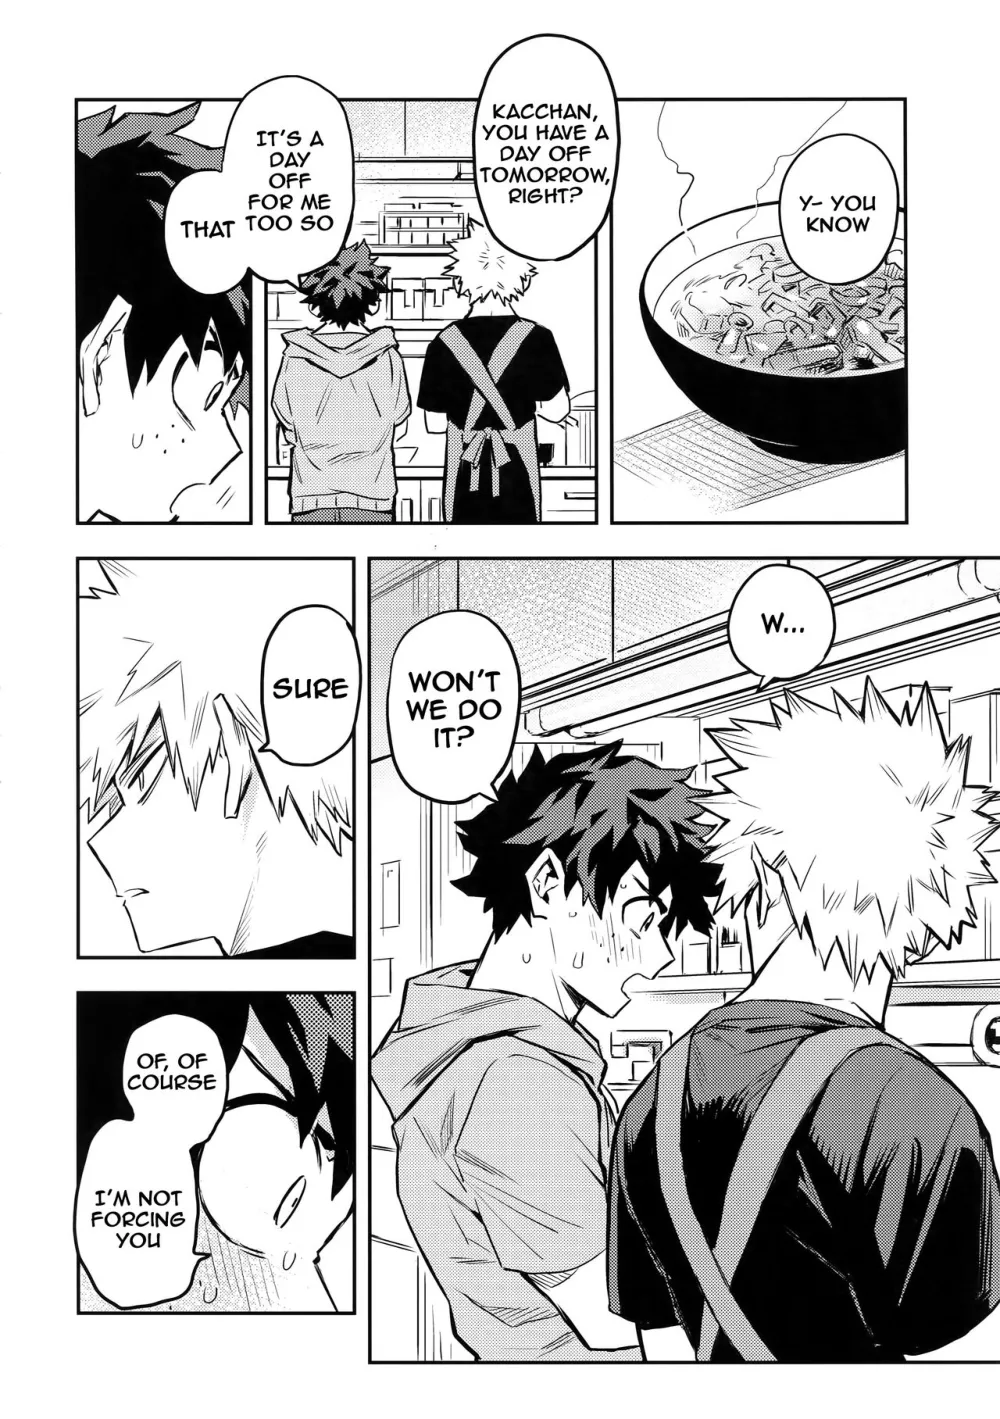 The Battle Between Sick Kacchan and Me - Page 3